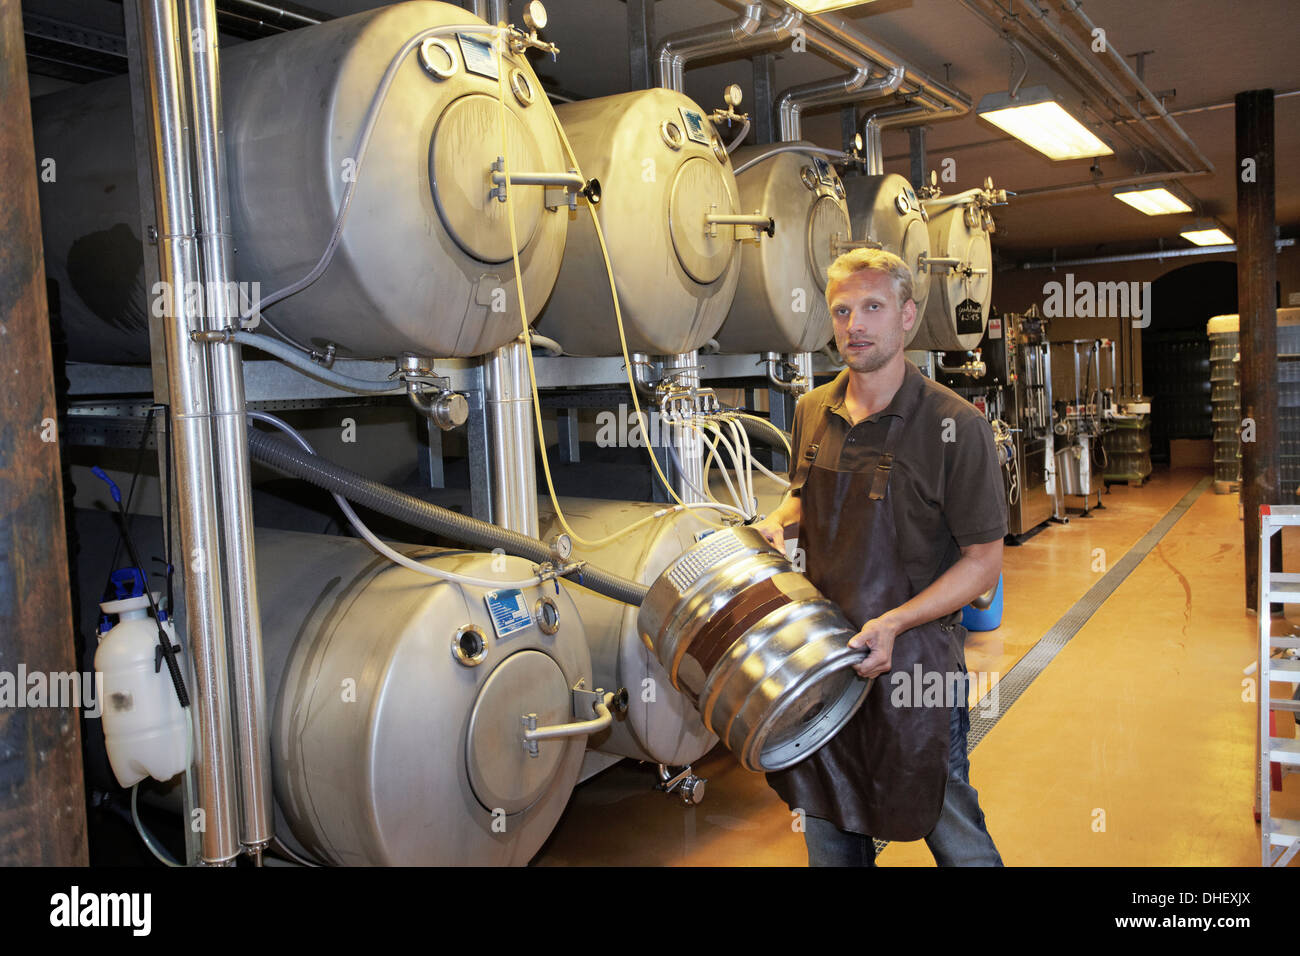 Man working at brewery Stock Photo